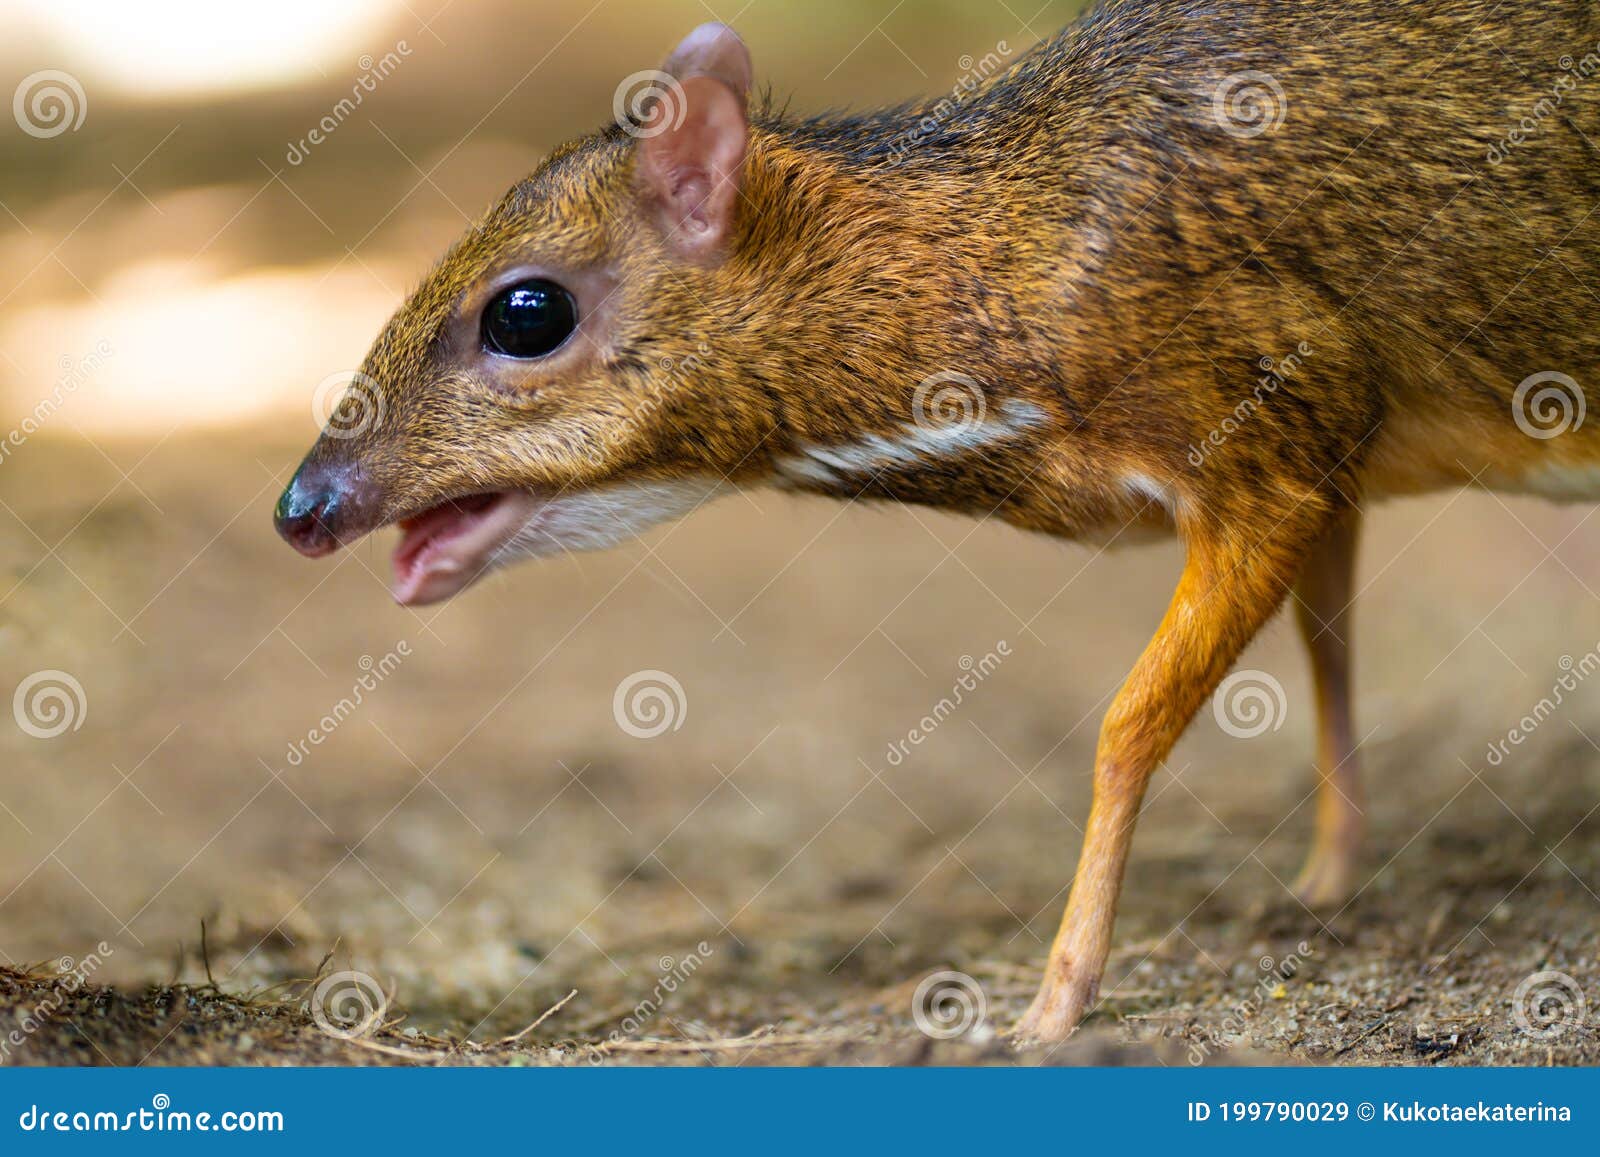 Kanchil is an Amazing Cute Baby Deer from the Tropics. the Mouse Deer is One  of the Most Unusual Animals Stock Image - Image of green, asian: 199790029